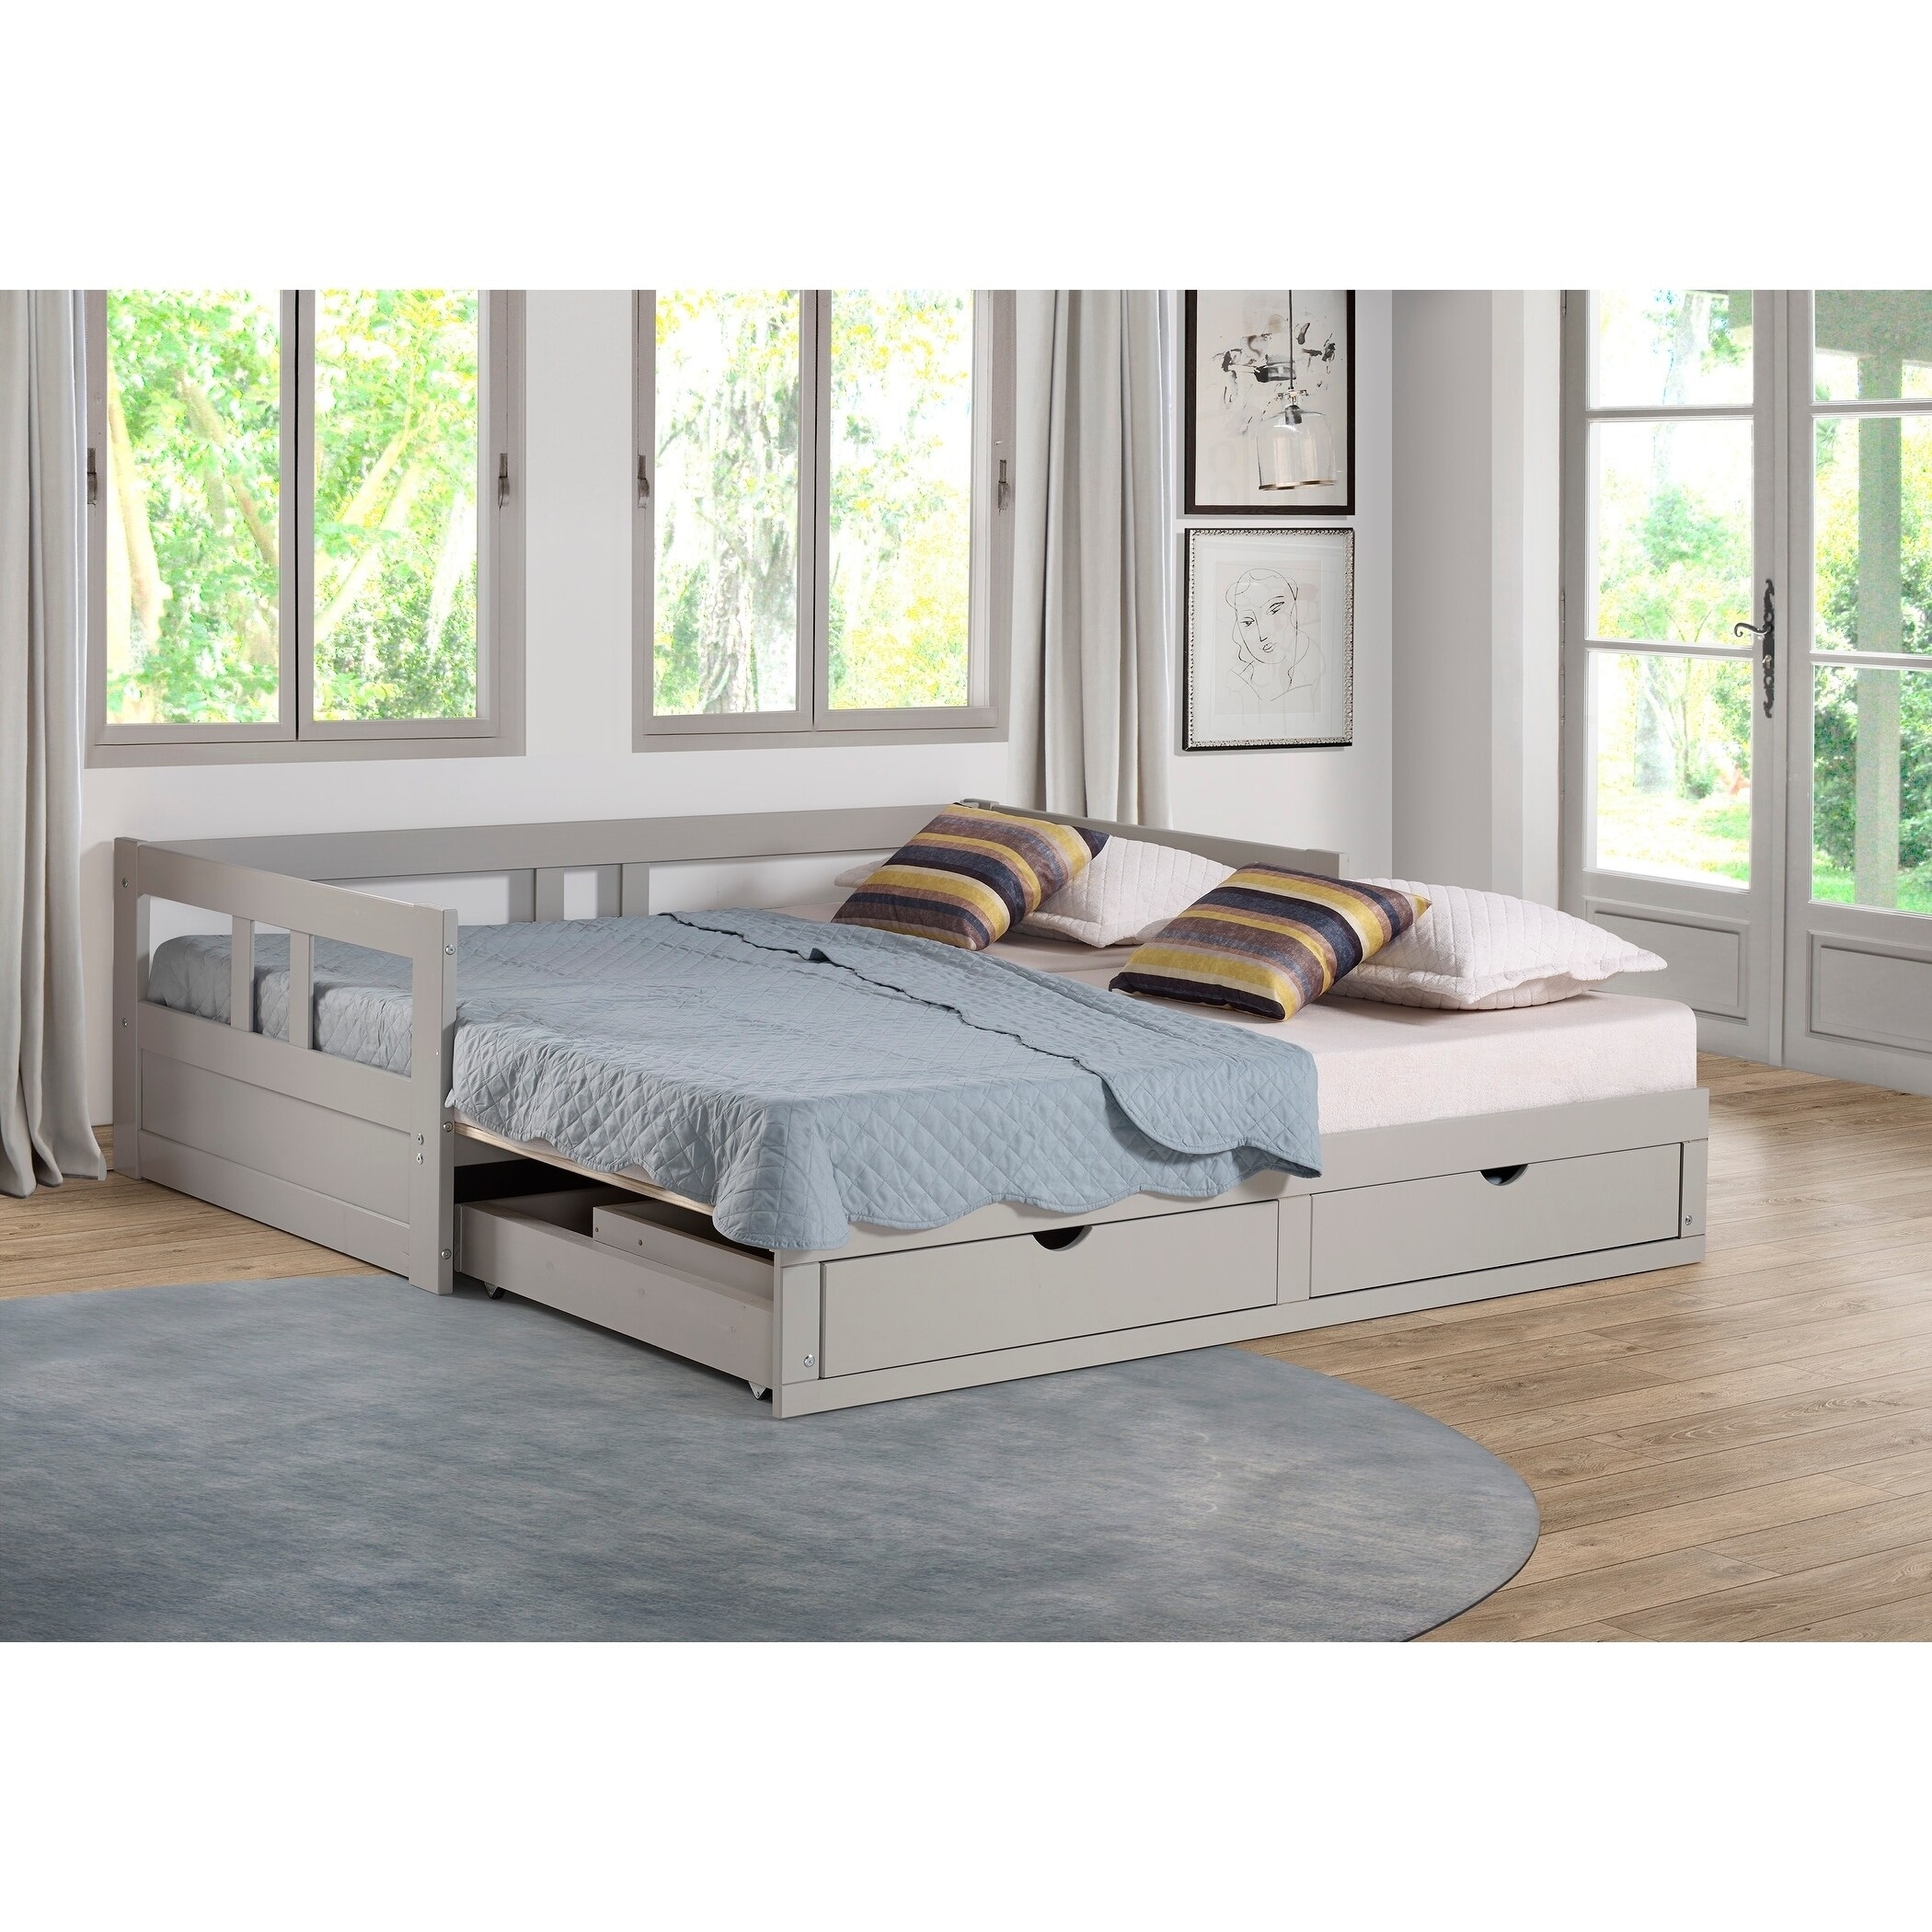 https://ak1.ostkcdn.com/images/products/is/images/direct/ce1d3ace217cf270356d4c7416018ce2124c9deb/Melody-Expandable-Twin-to-King-Trundle-Daybed-with-Storage-Drawers.jpg